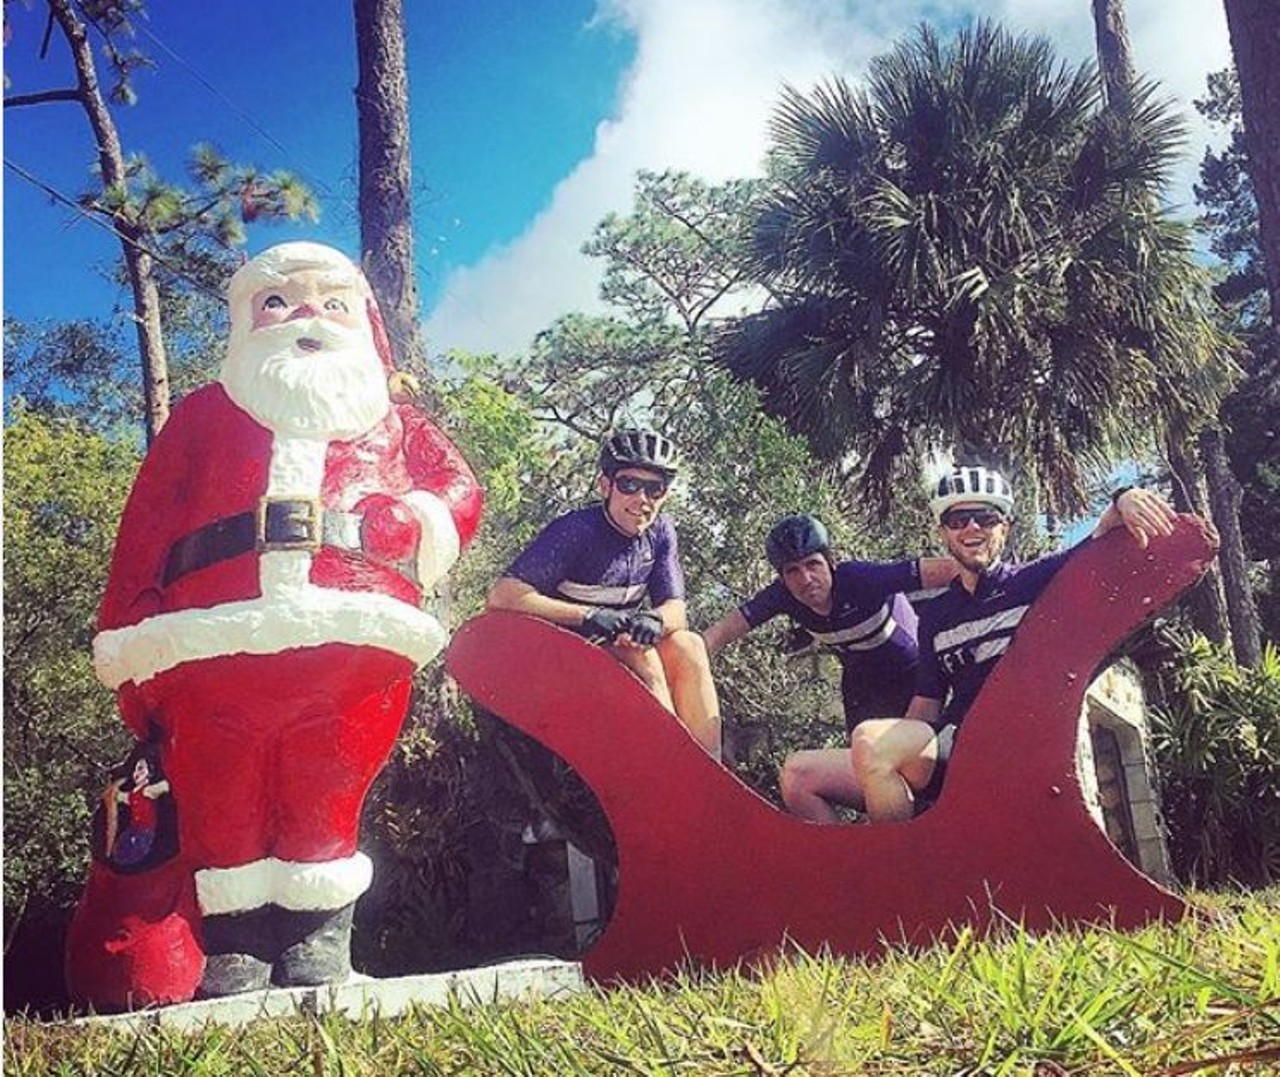 Experience year-round Christmas cheer at the appropriately named Christmas, Florida 
Highway 50, east of Orlando
The appropriately named Christmas is a city that celebrates, well, Christmas all year-round, with decorations around every corner. While you&#146;re here, check some of their quirky attractions, including the world&#146;s largest alligator shaped building.
Photo via ticbowen/Instagram